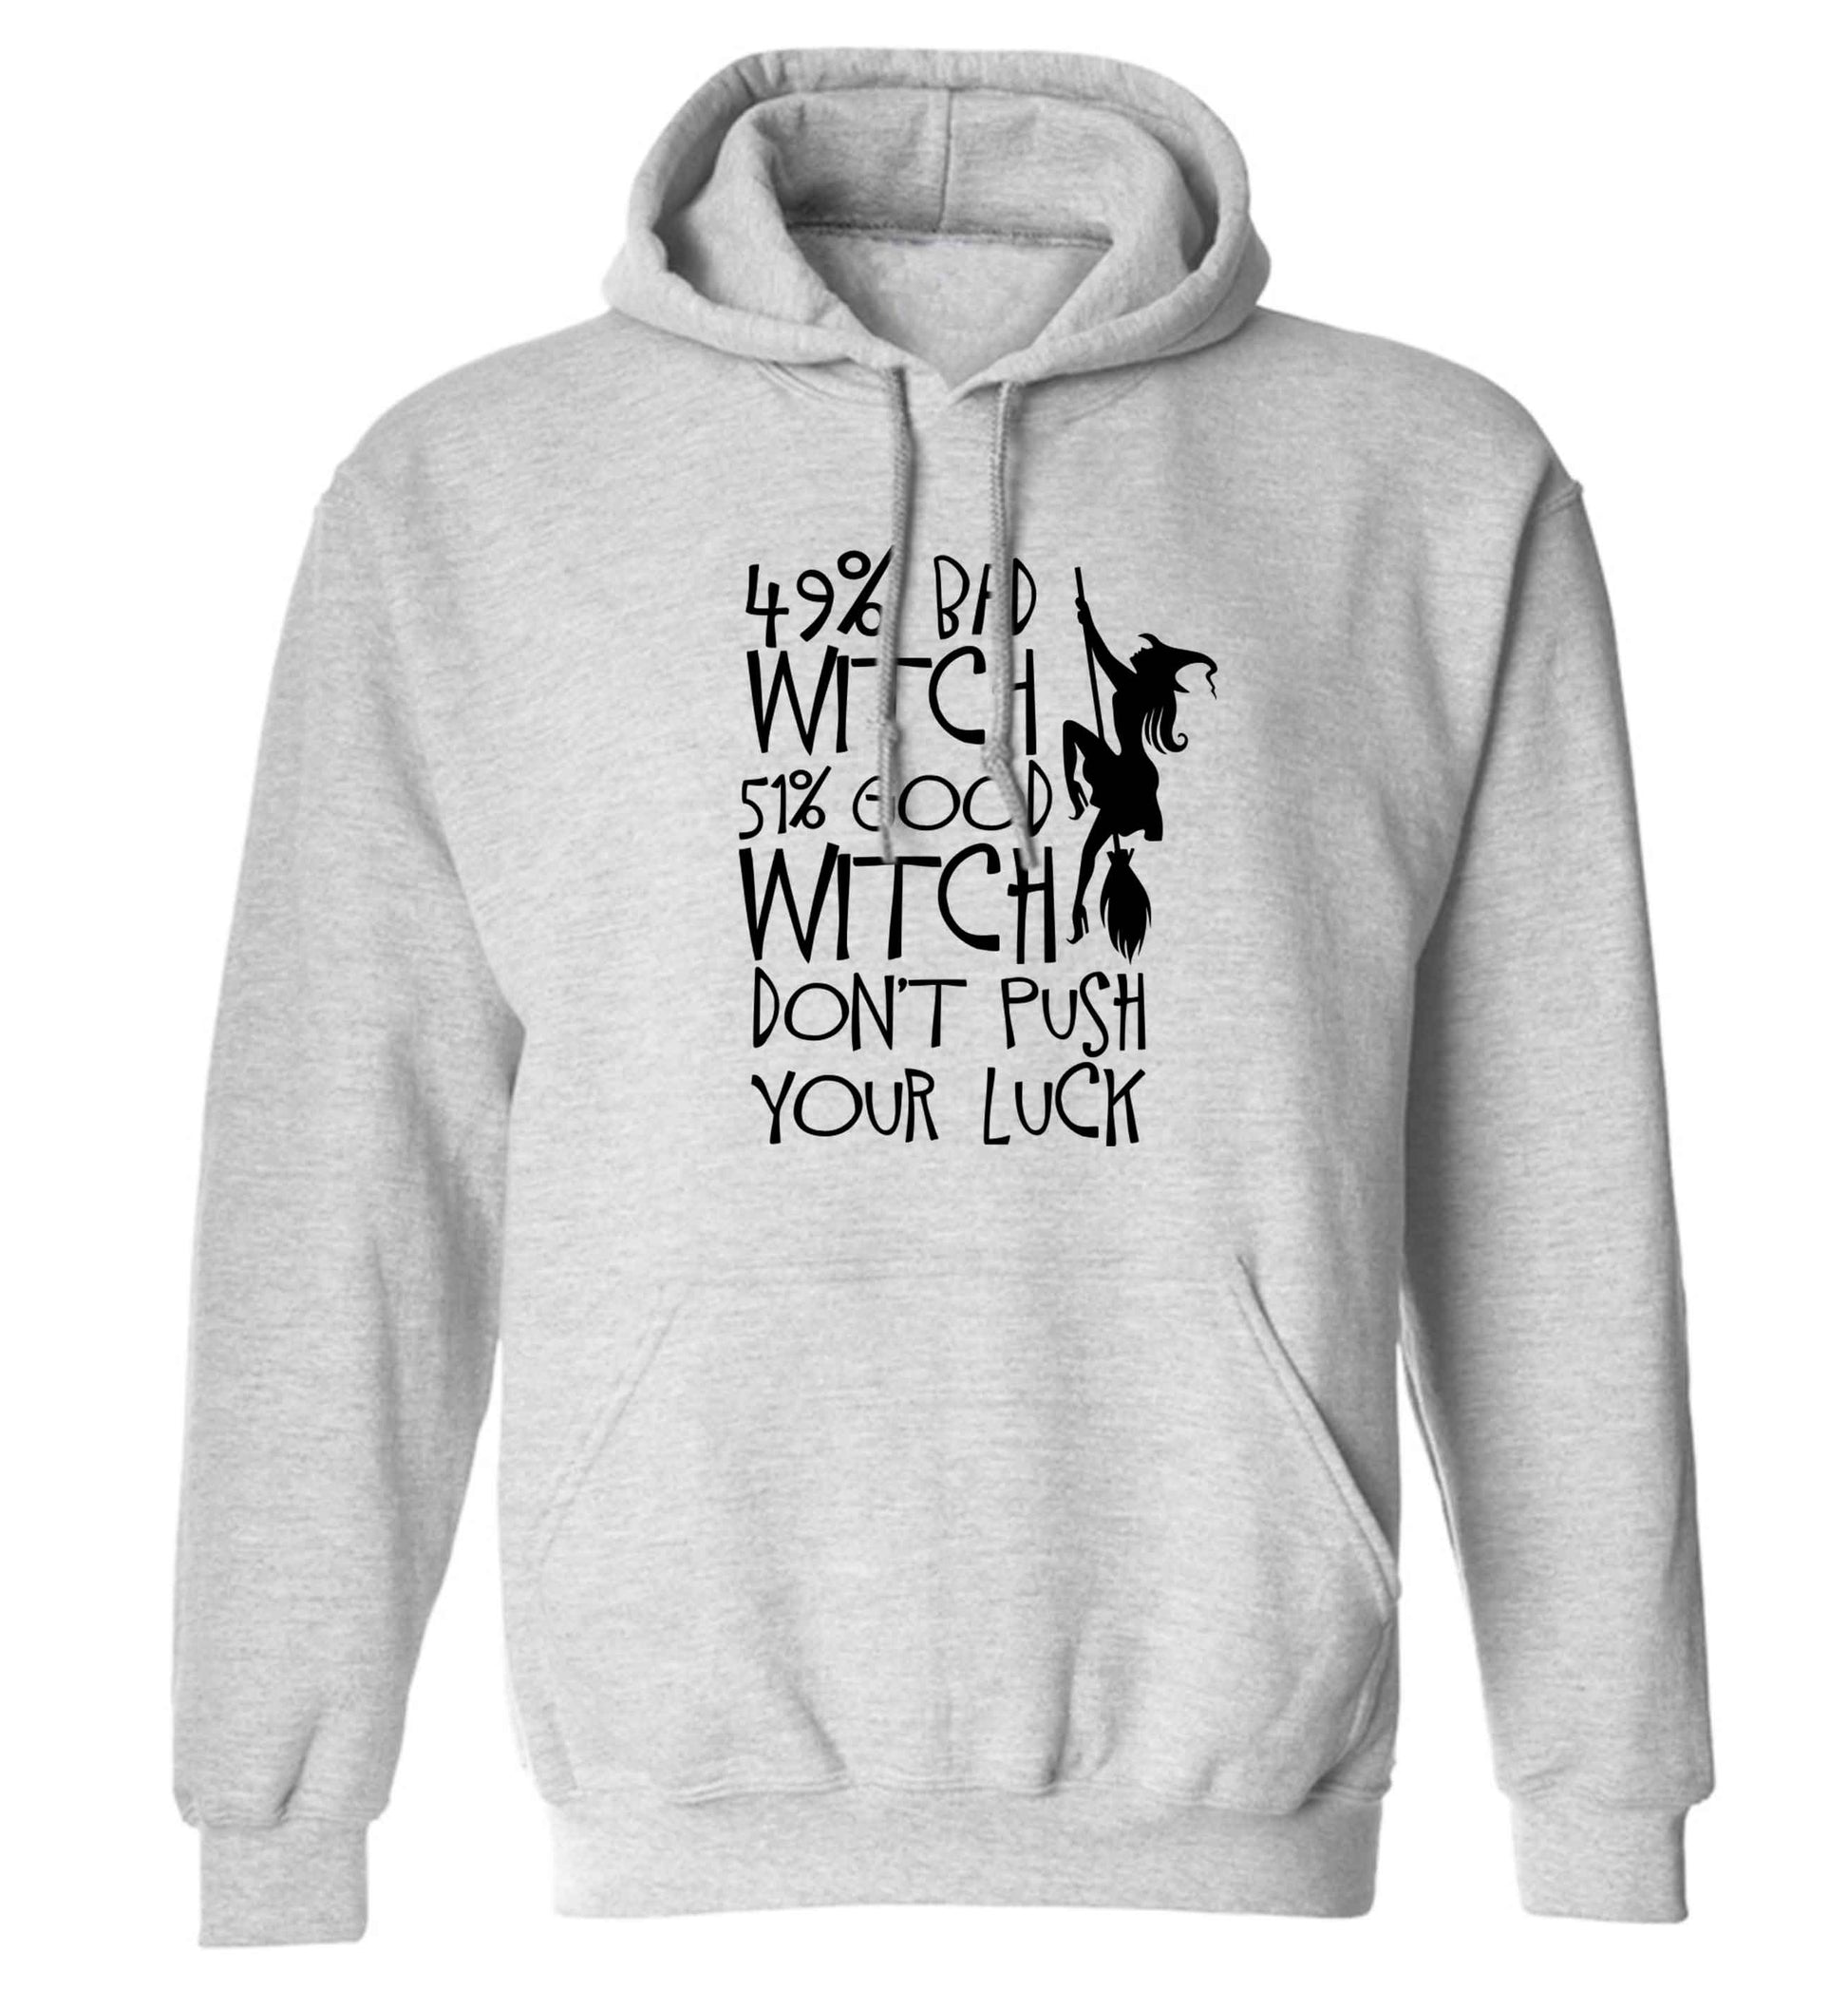 49% bad witch 51% good witch don't push your luck adults unisex grey hoodie 2XL